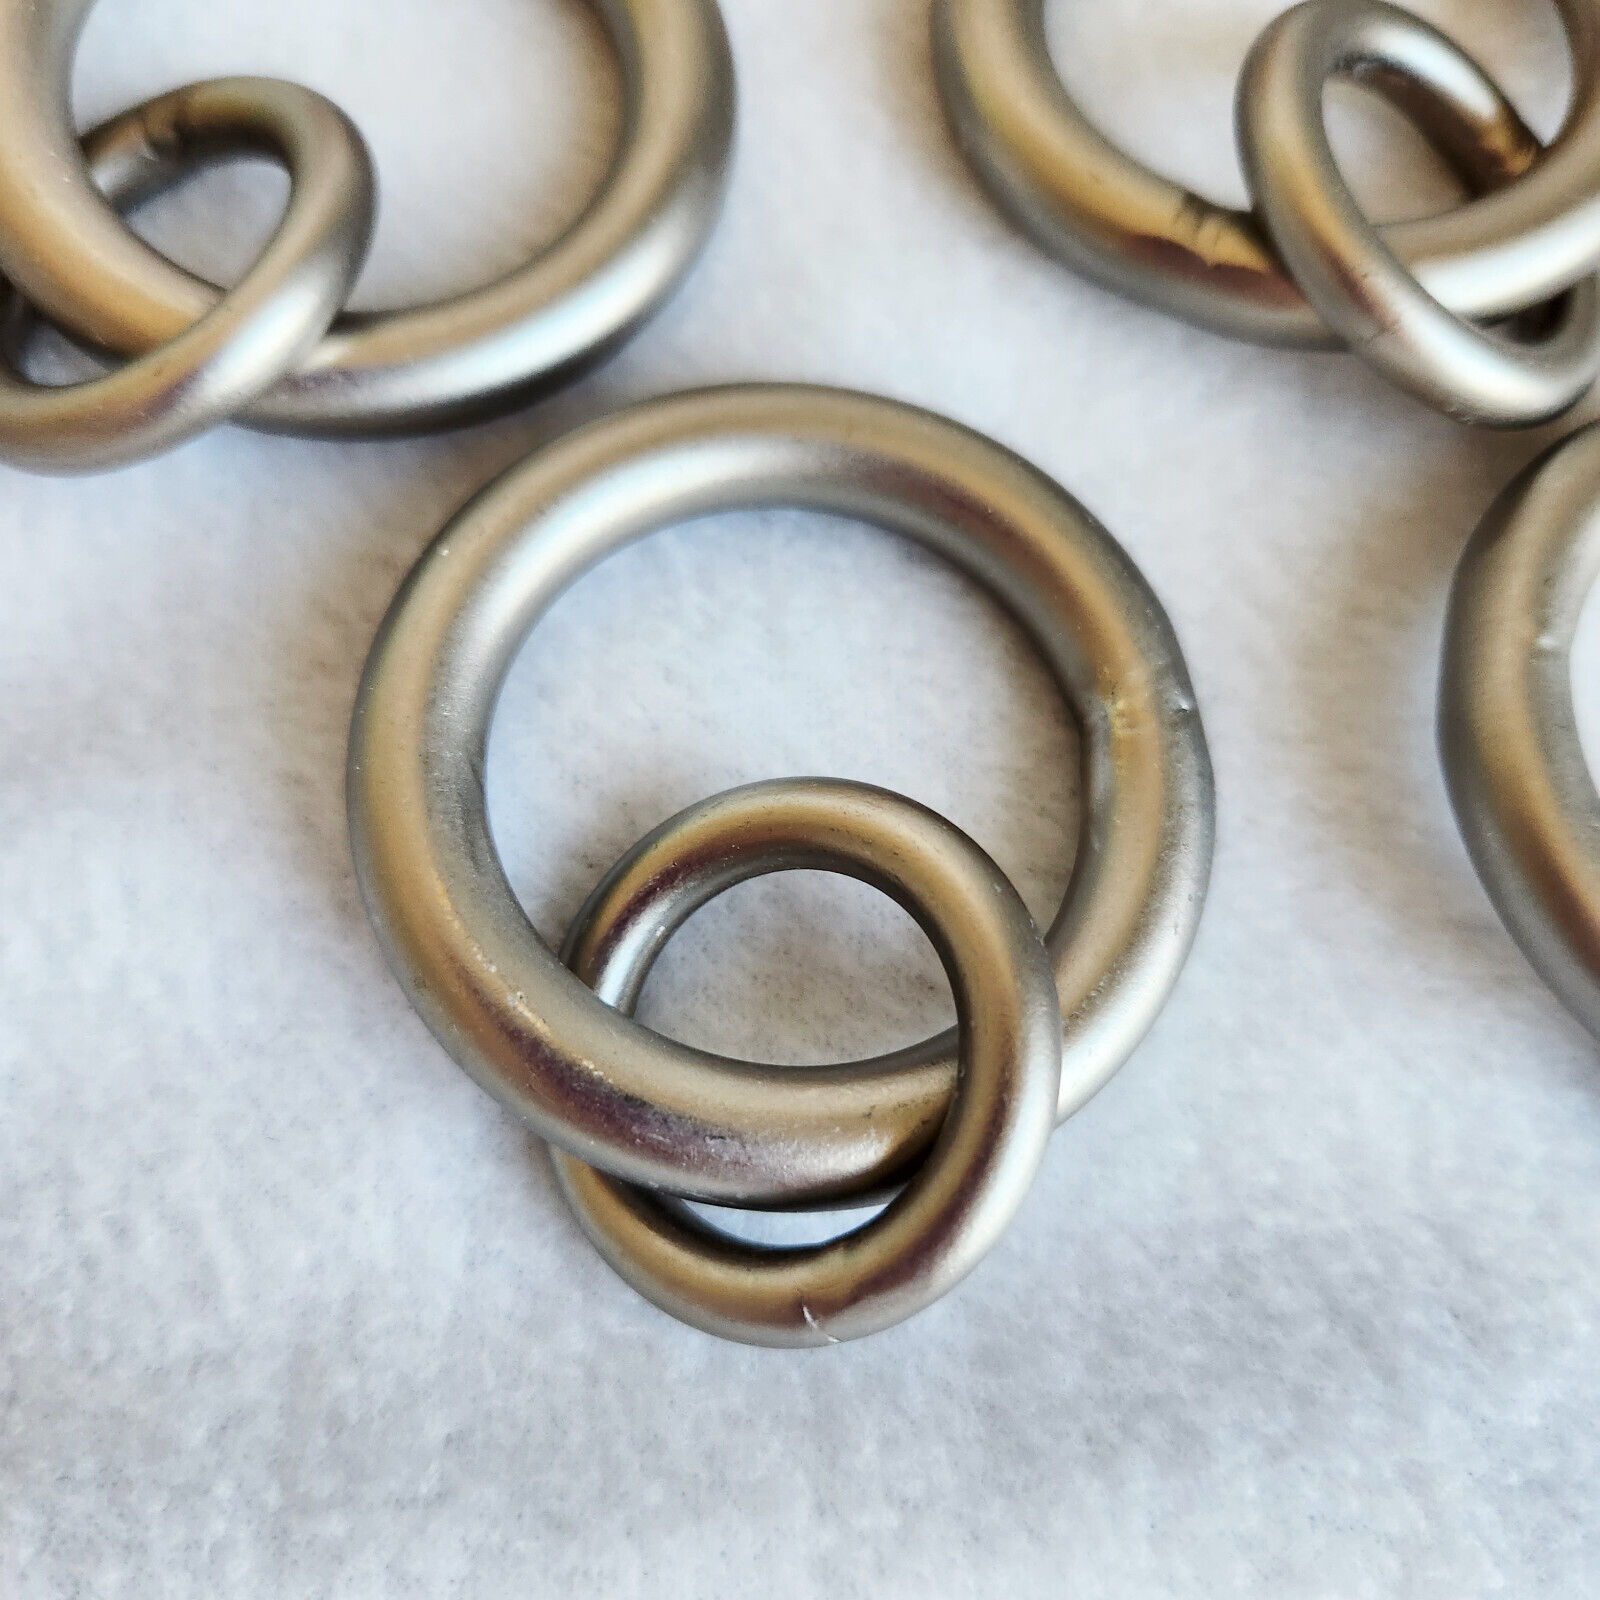 Set of 7 Pottery Barn Double Rings Pewter Small Curtain 1.25" Round New - $18.43